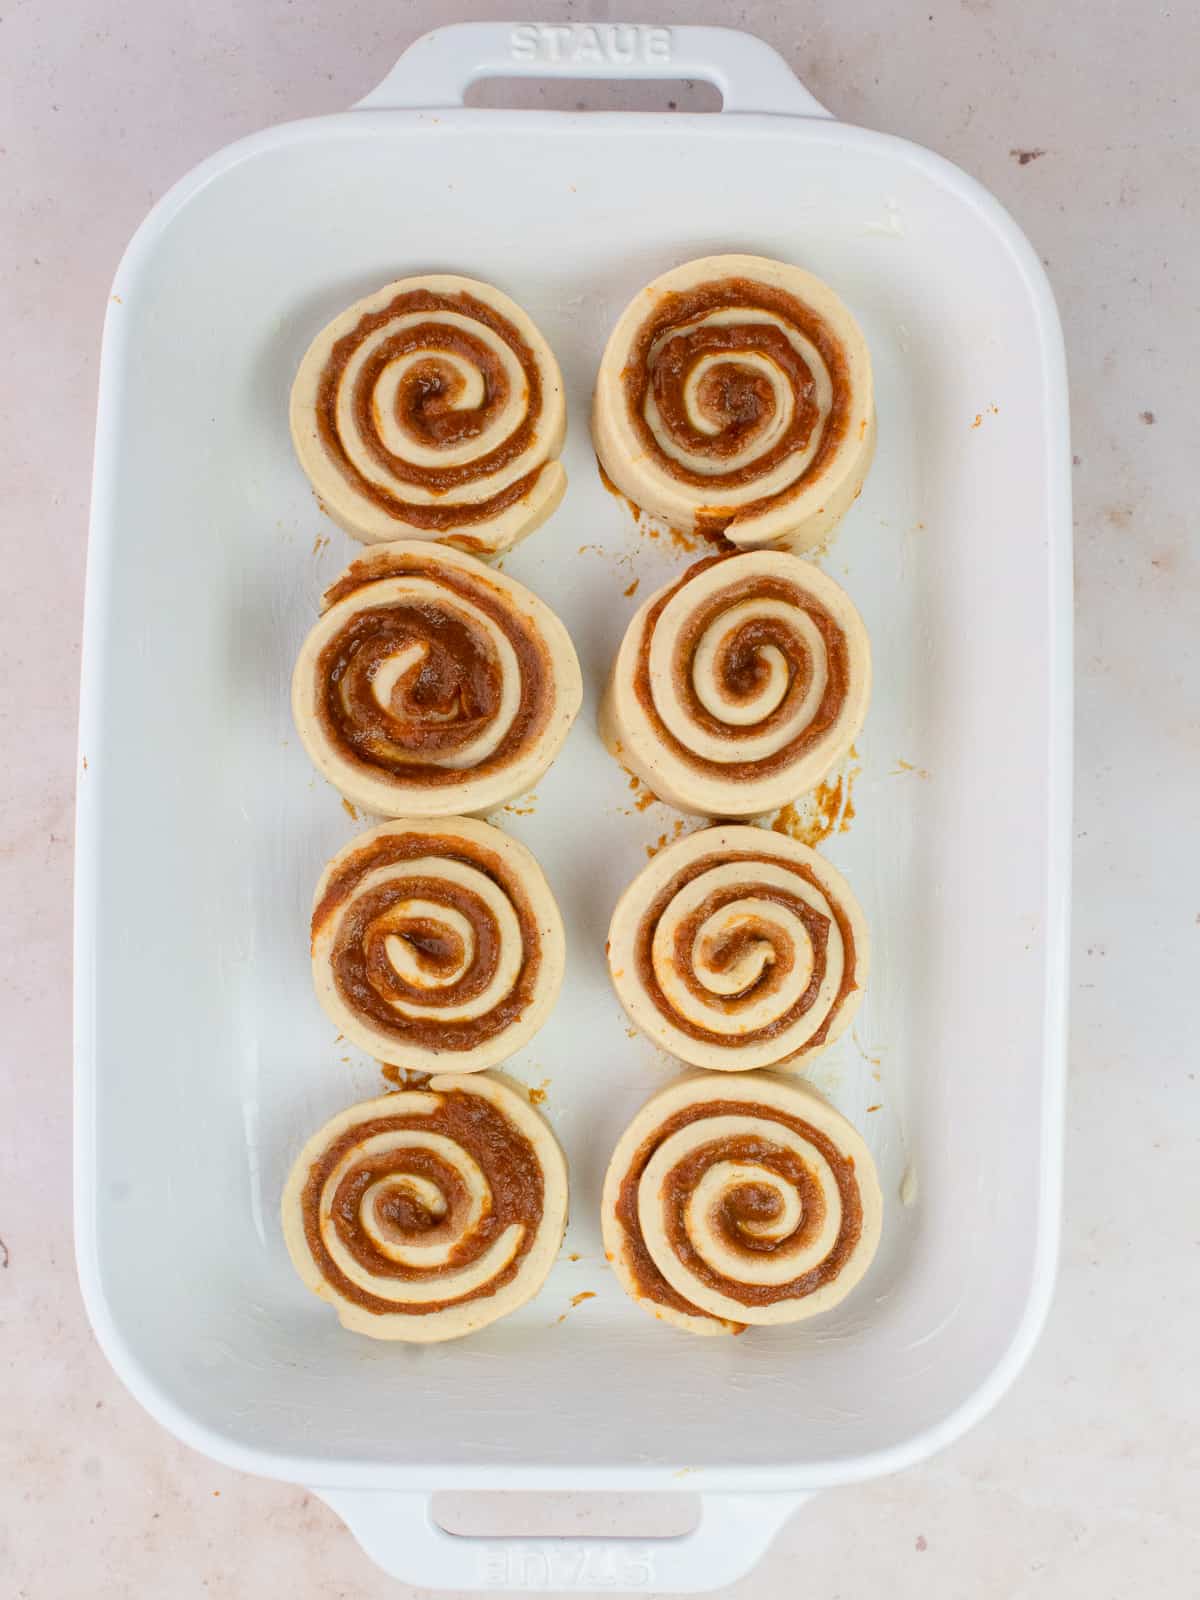 Cinnamon rolls in baking dish before proofing